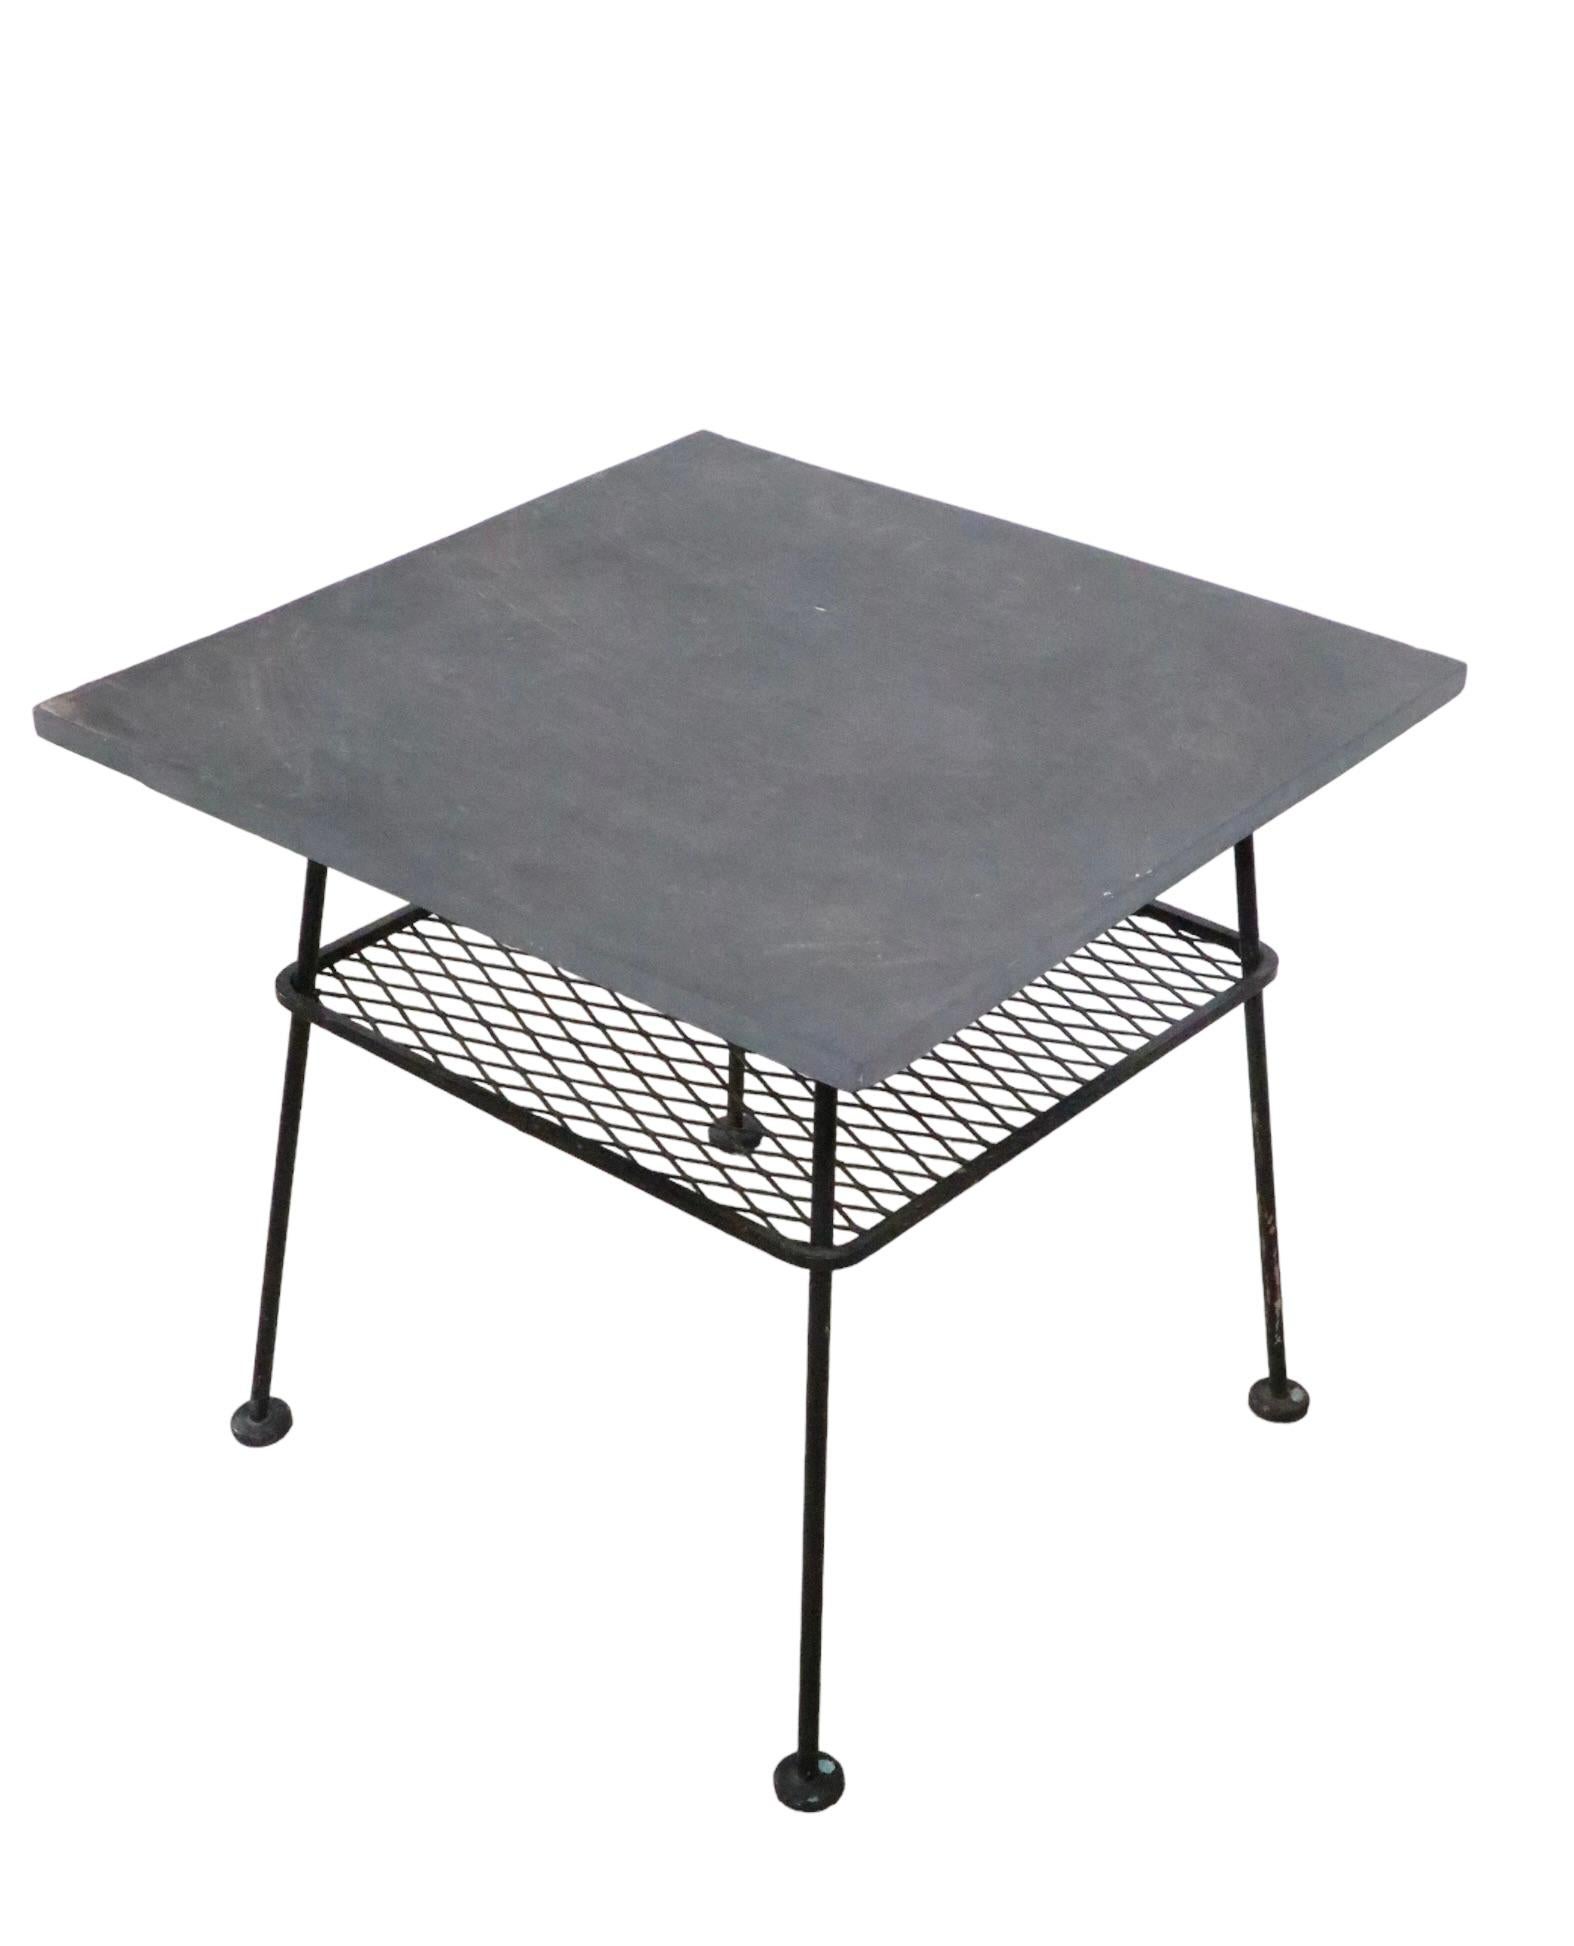 American Wrought Iron and Slate Garden Patio, Sunroom Table After McCobb, Woodard, 1950s For Sale